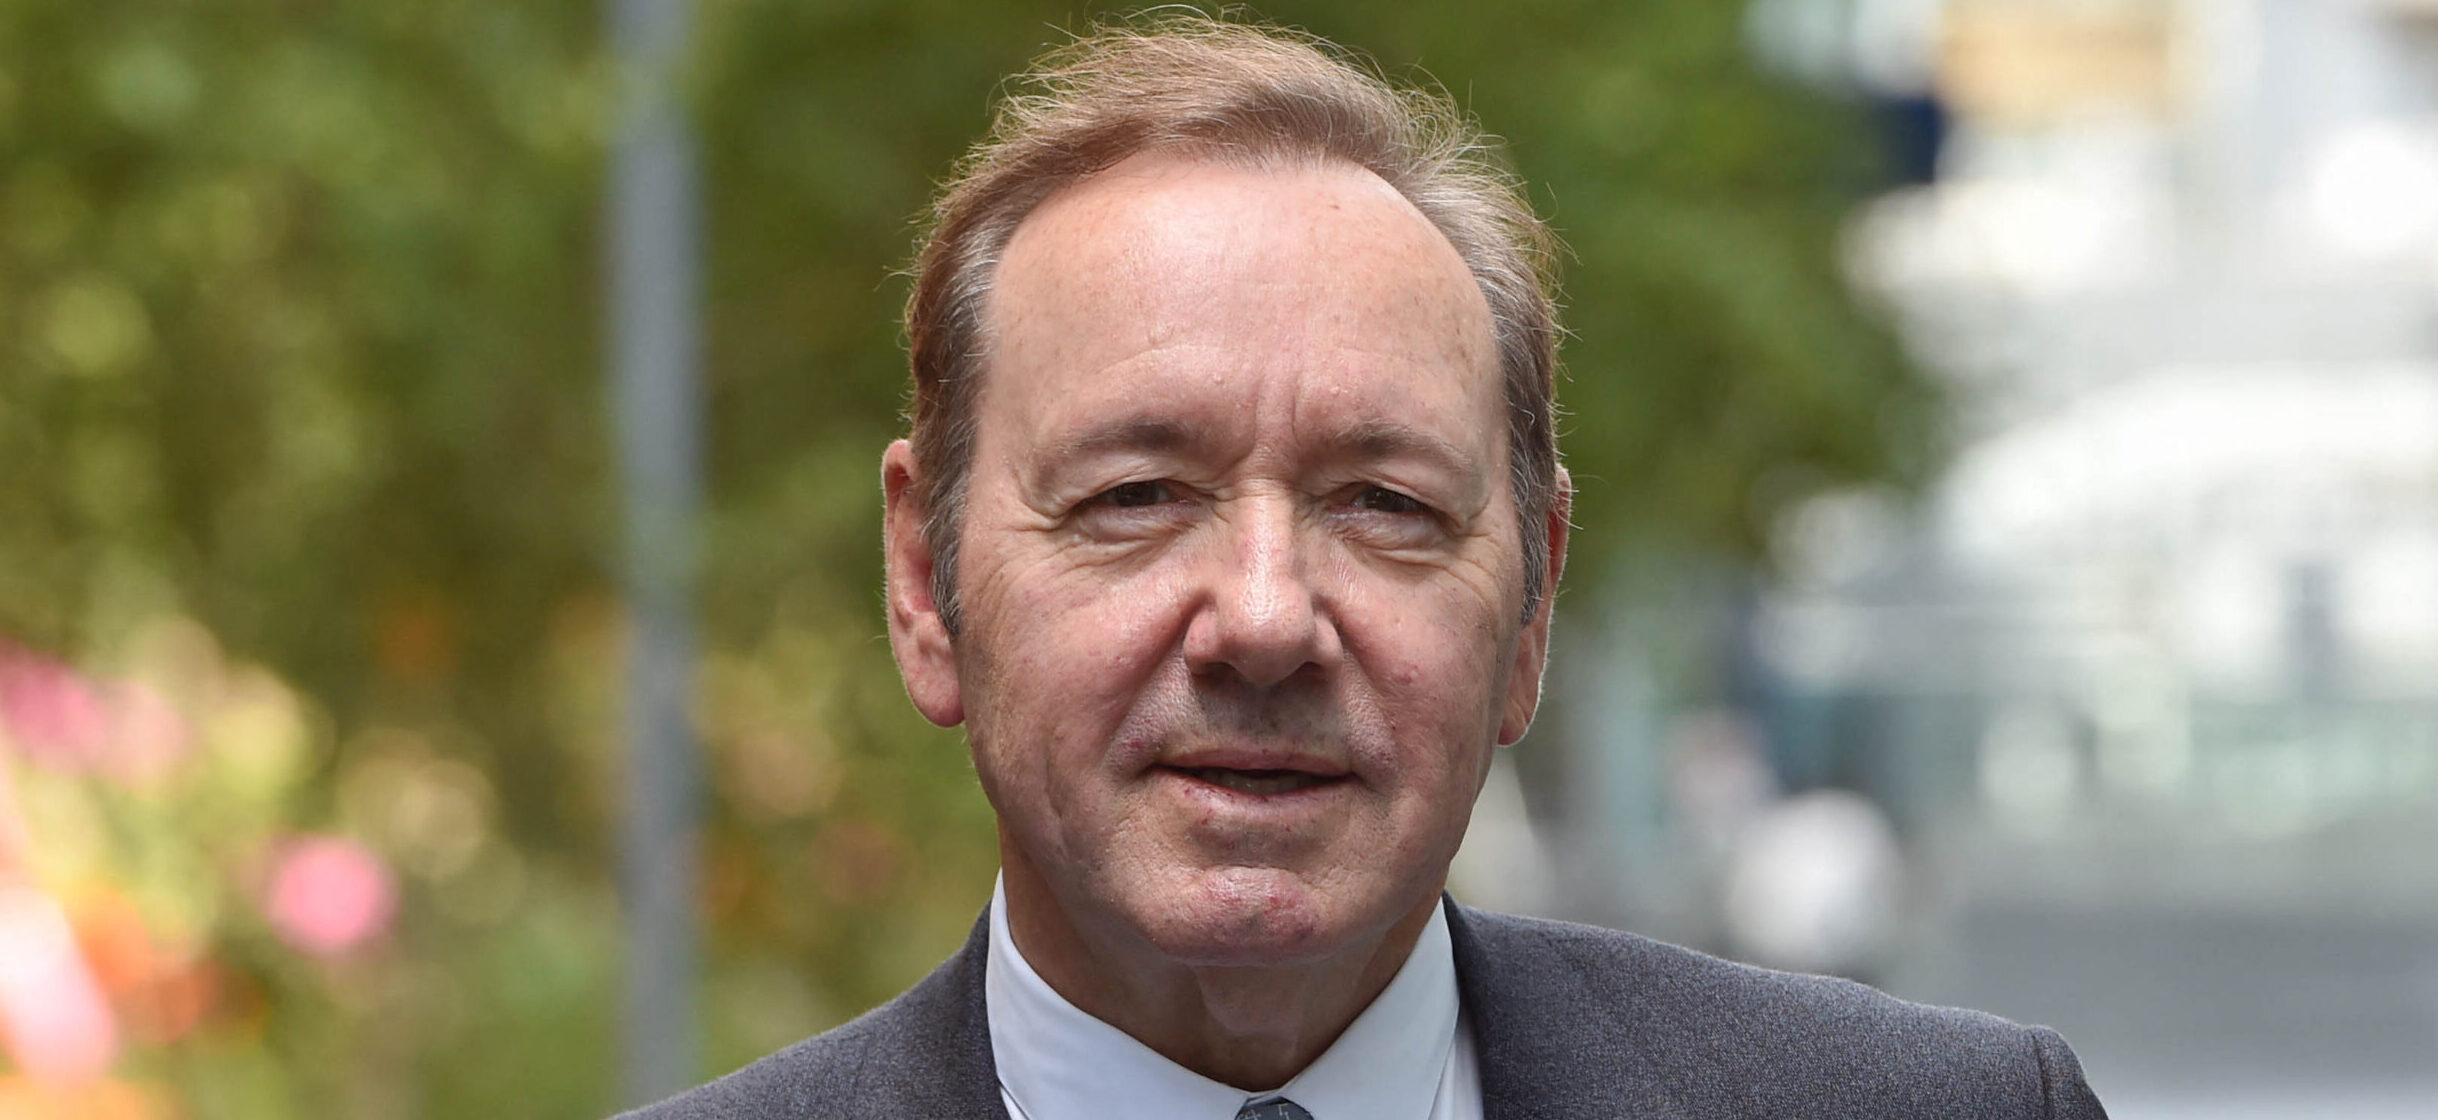 Kevin Spacey Makes Comeback With Rousing Ovation At Oxford Following Sexual Assault Charges